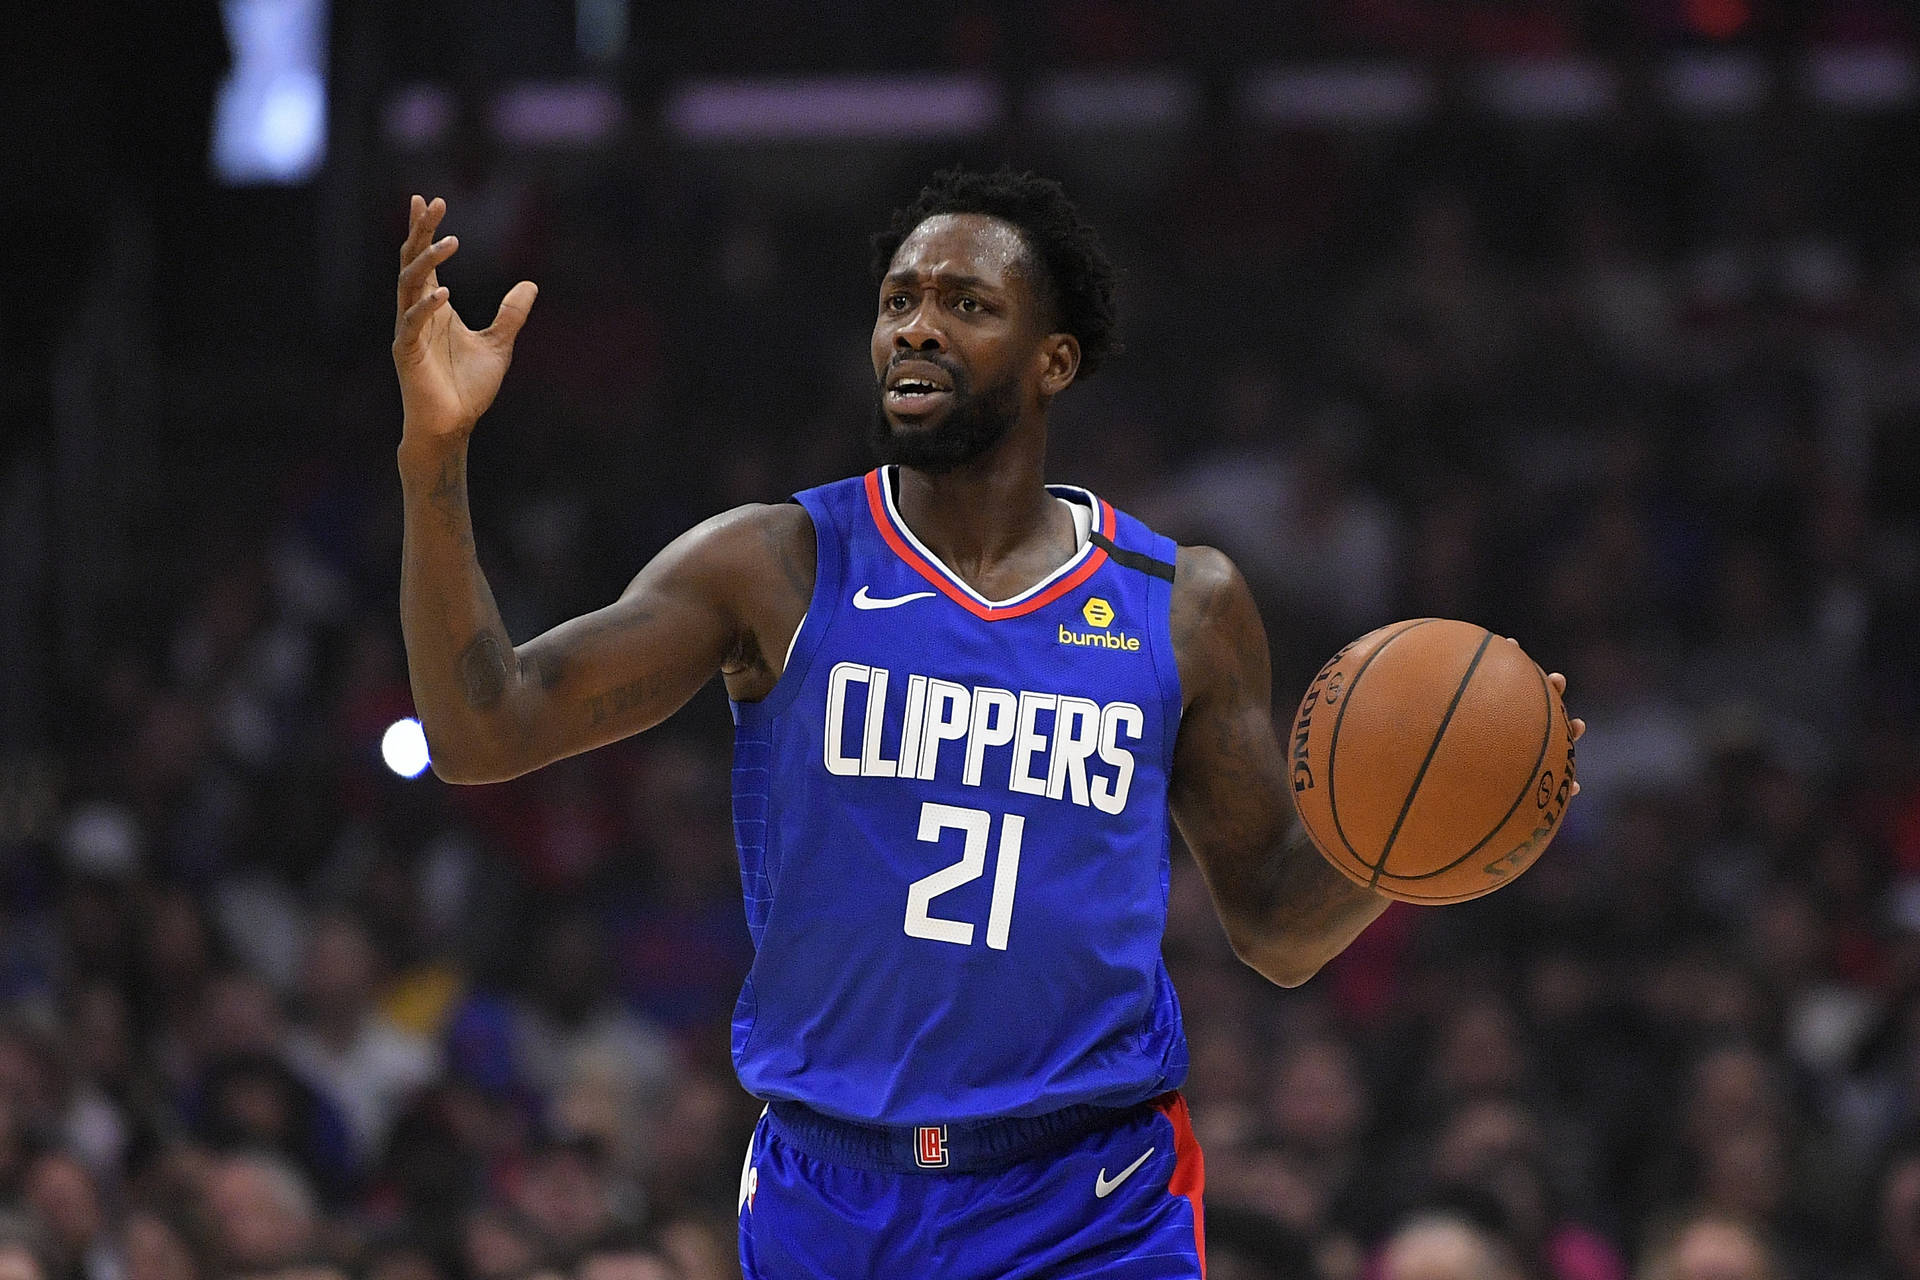 Patrick Beverly In Blue Clippers Jersey Background